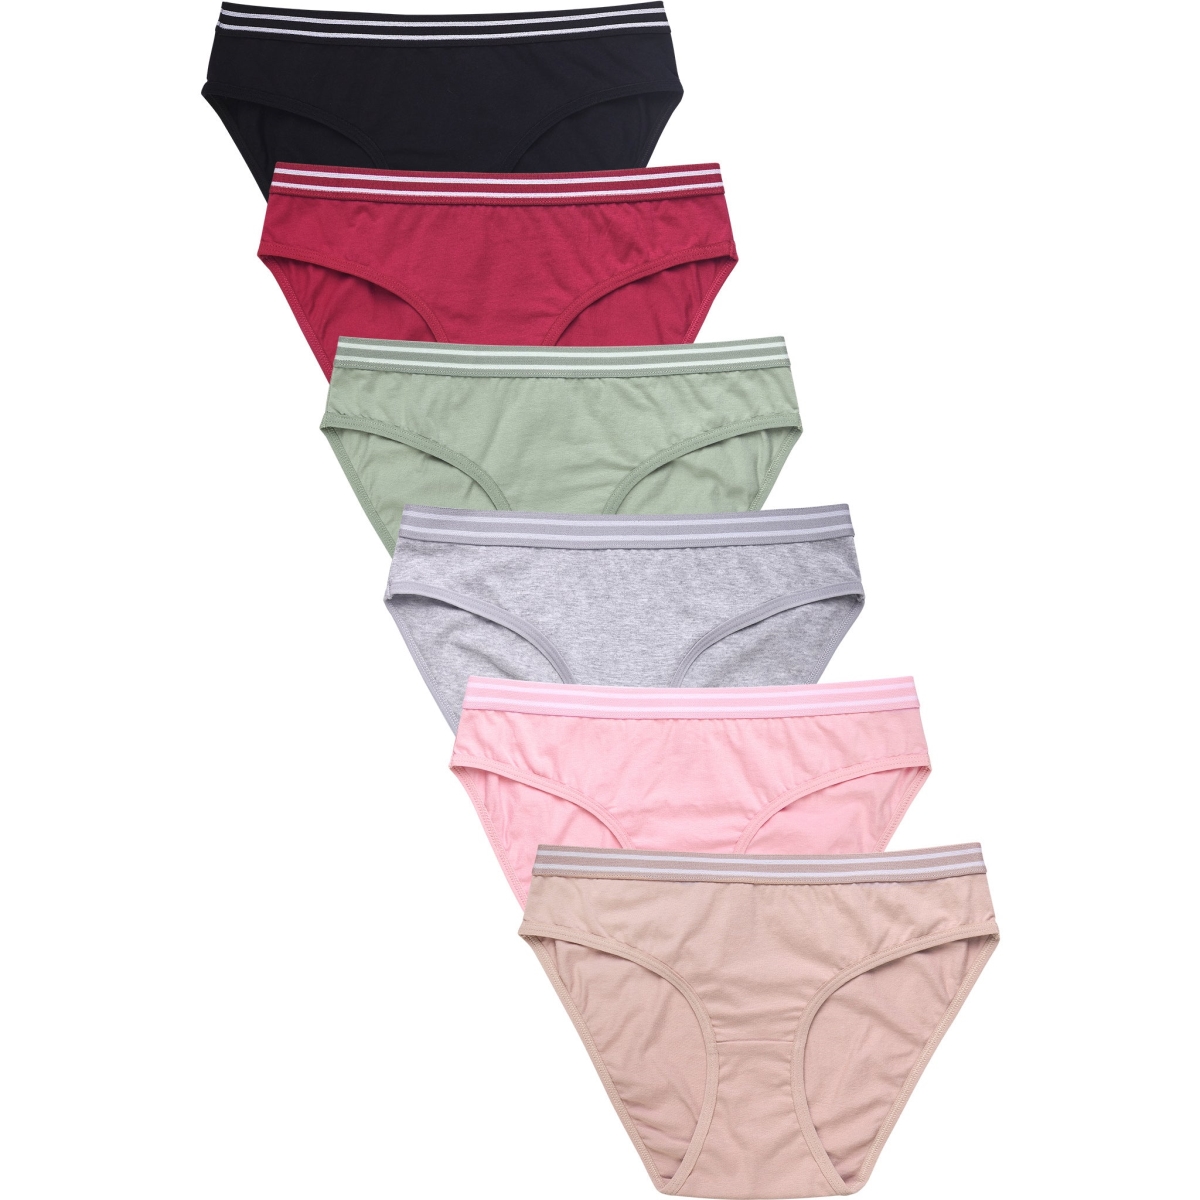 Picture of 247 Frenzy 247-LP1361CK4-LG Sofra Womens Essentials Cotton Stretch Bikini Panty Underwear - Assorted Color - Large - Pack of 6